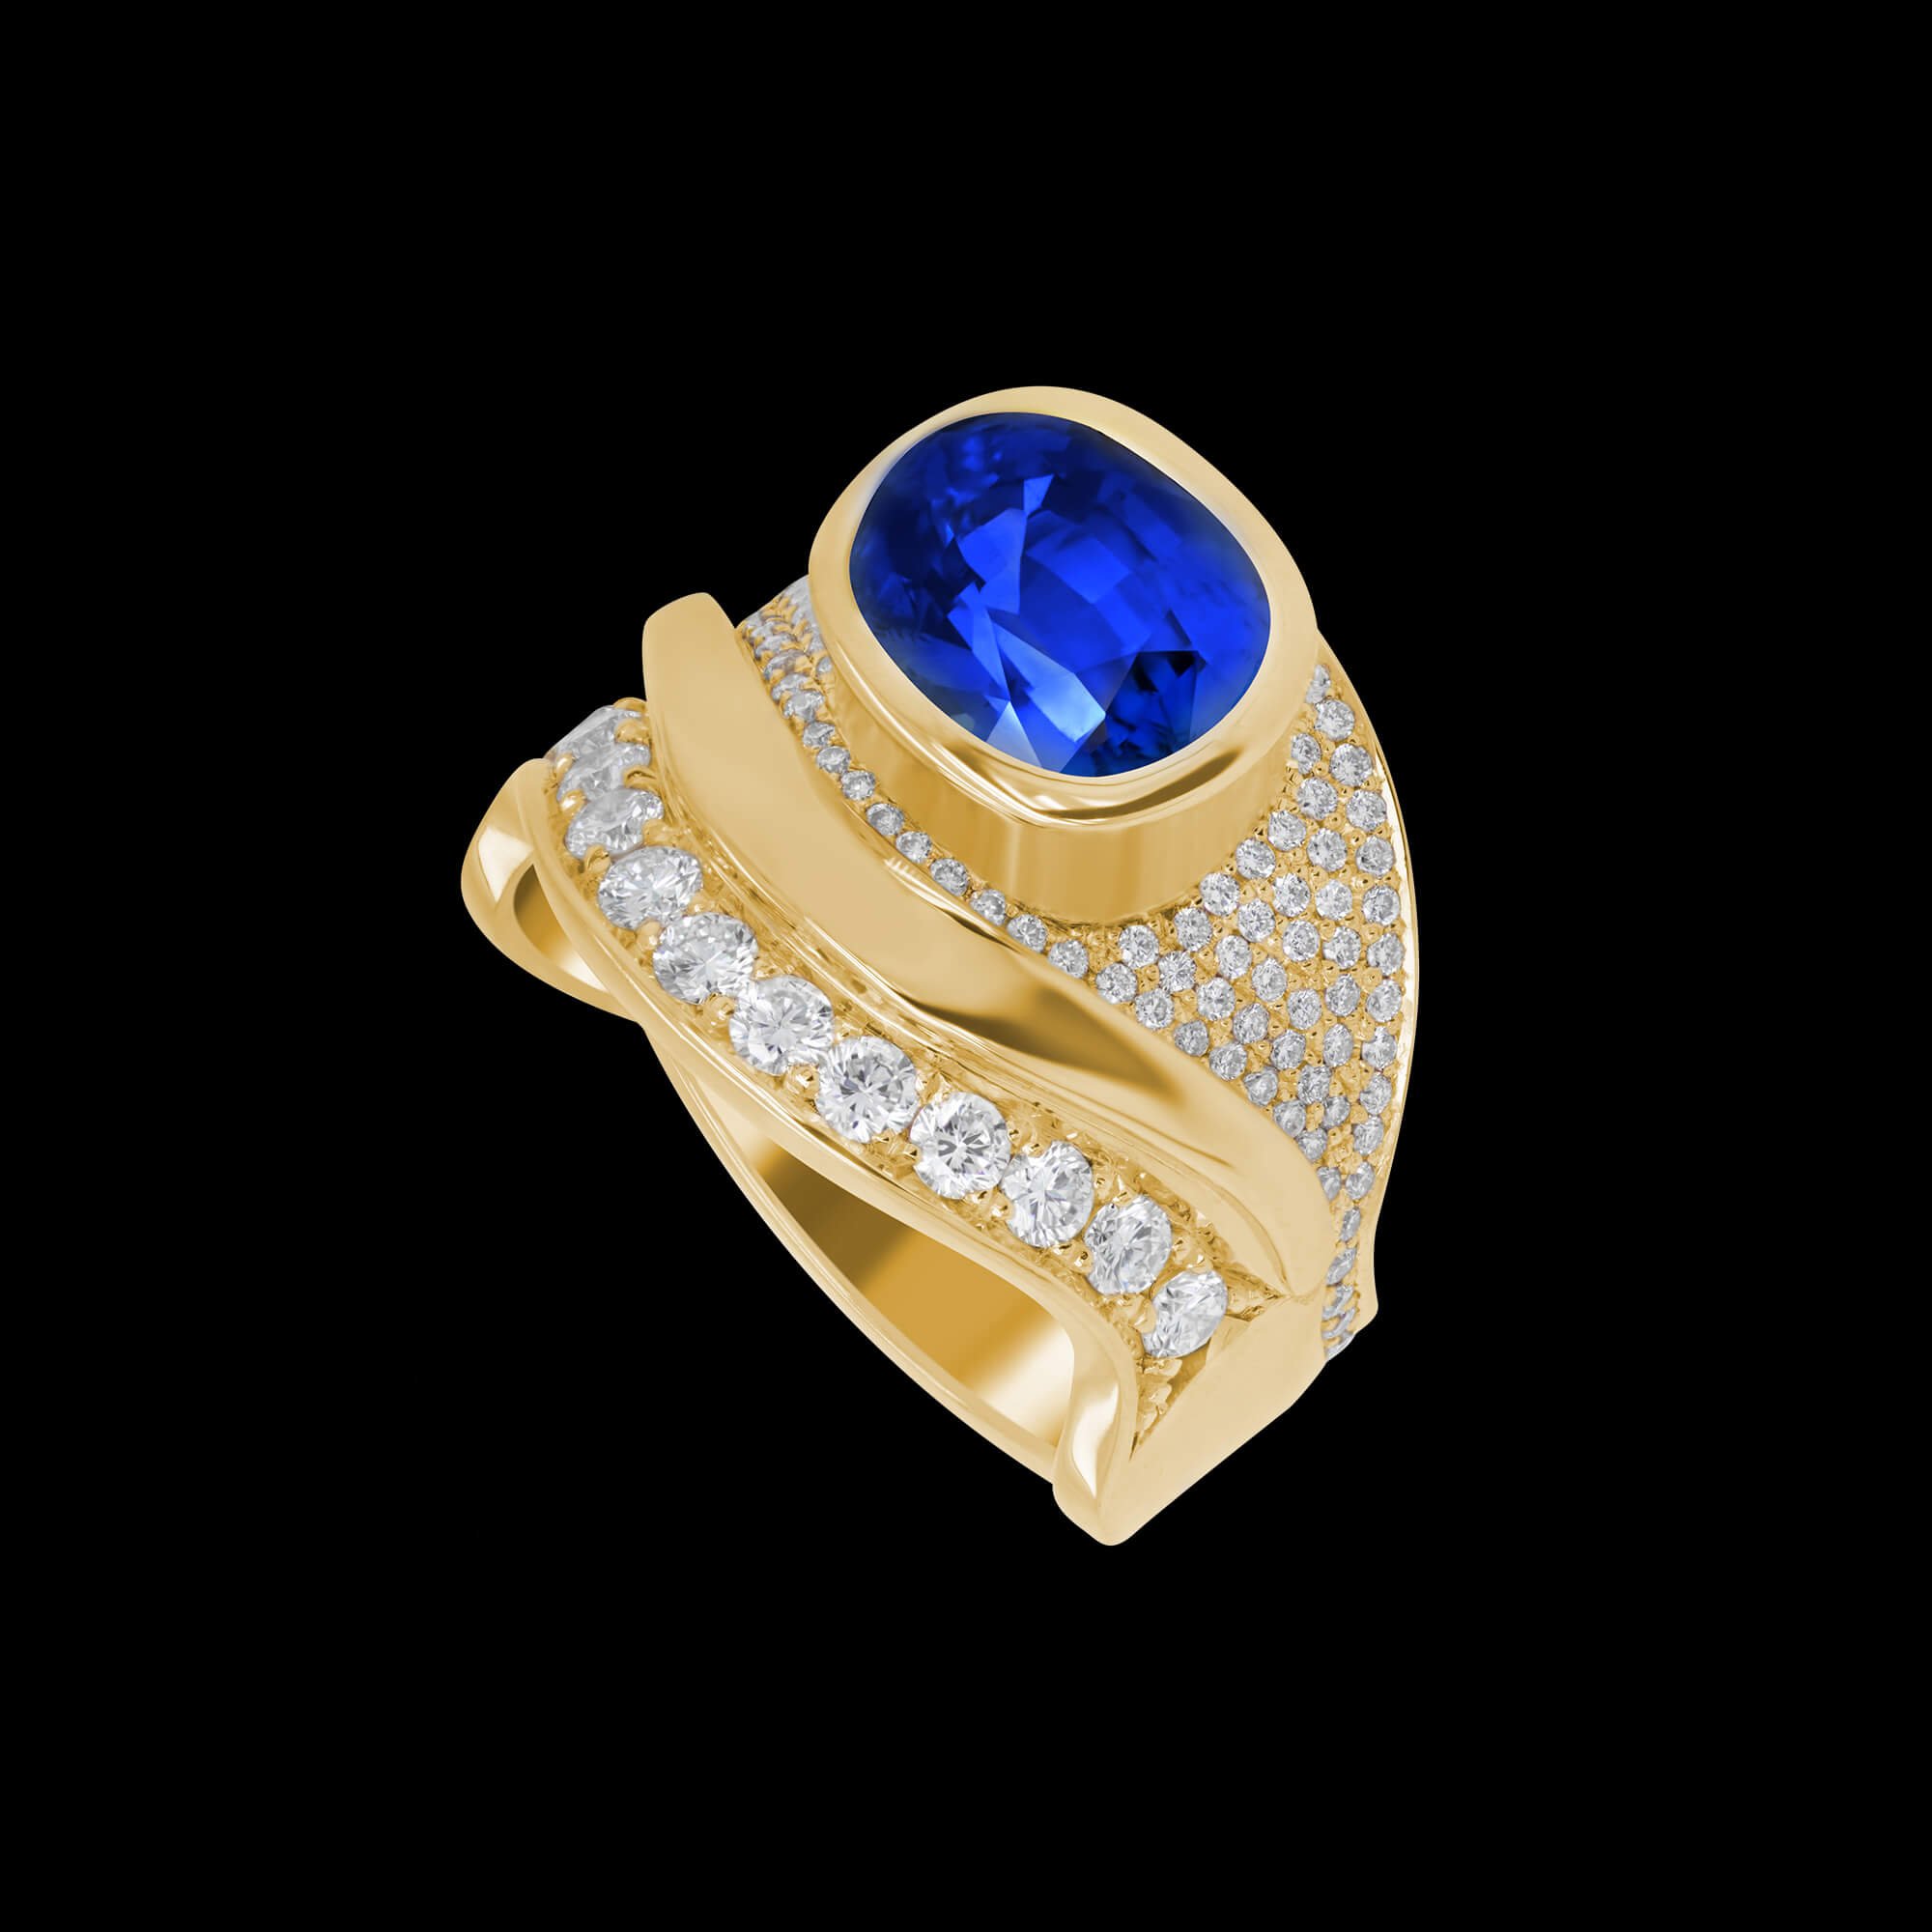 Bespoke Wave ring in 18kt yellow gold with an oval blue sapphire and brilliant-cut diamonds | Ocean Collection. FRIDA | Fine Jewellery.jpg